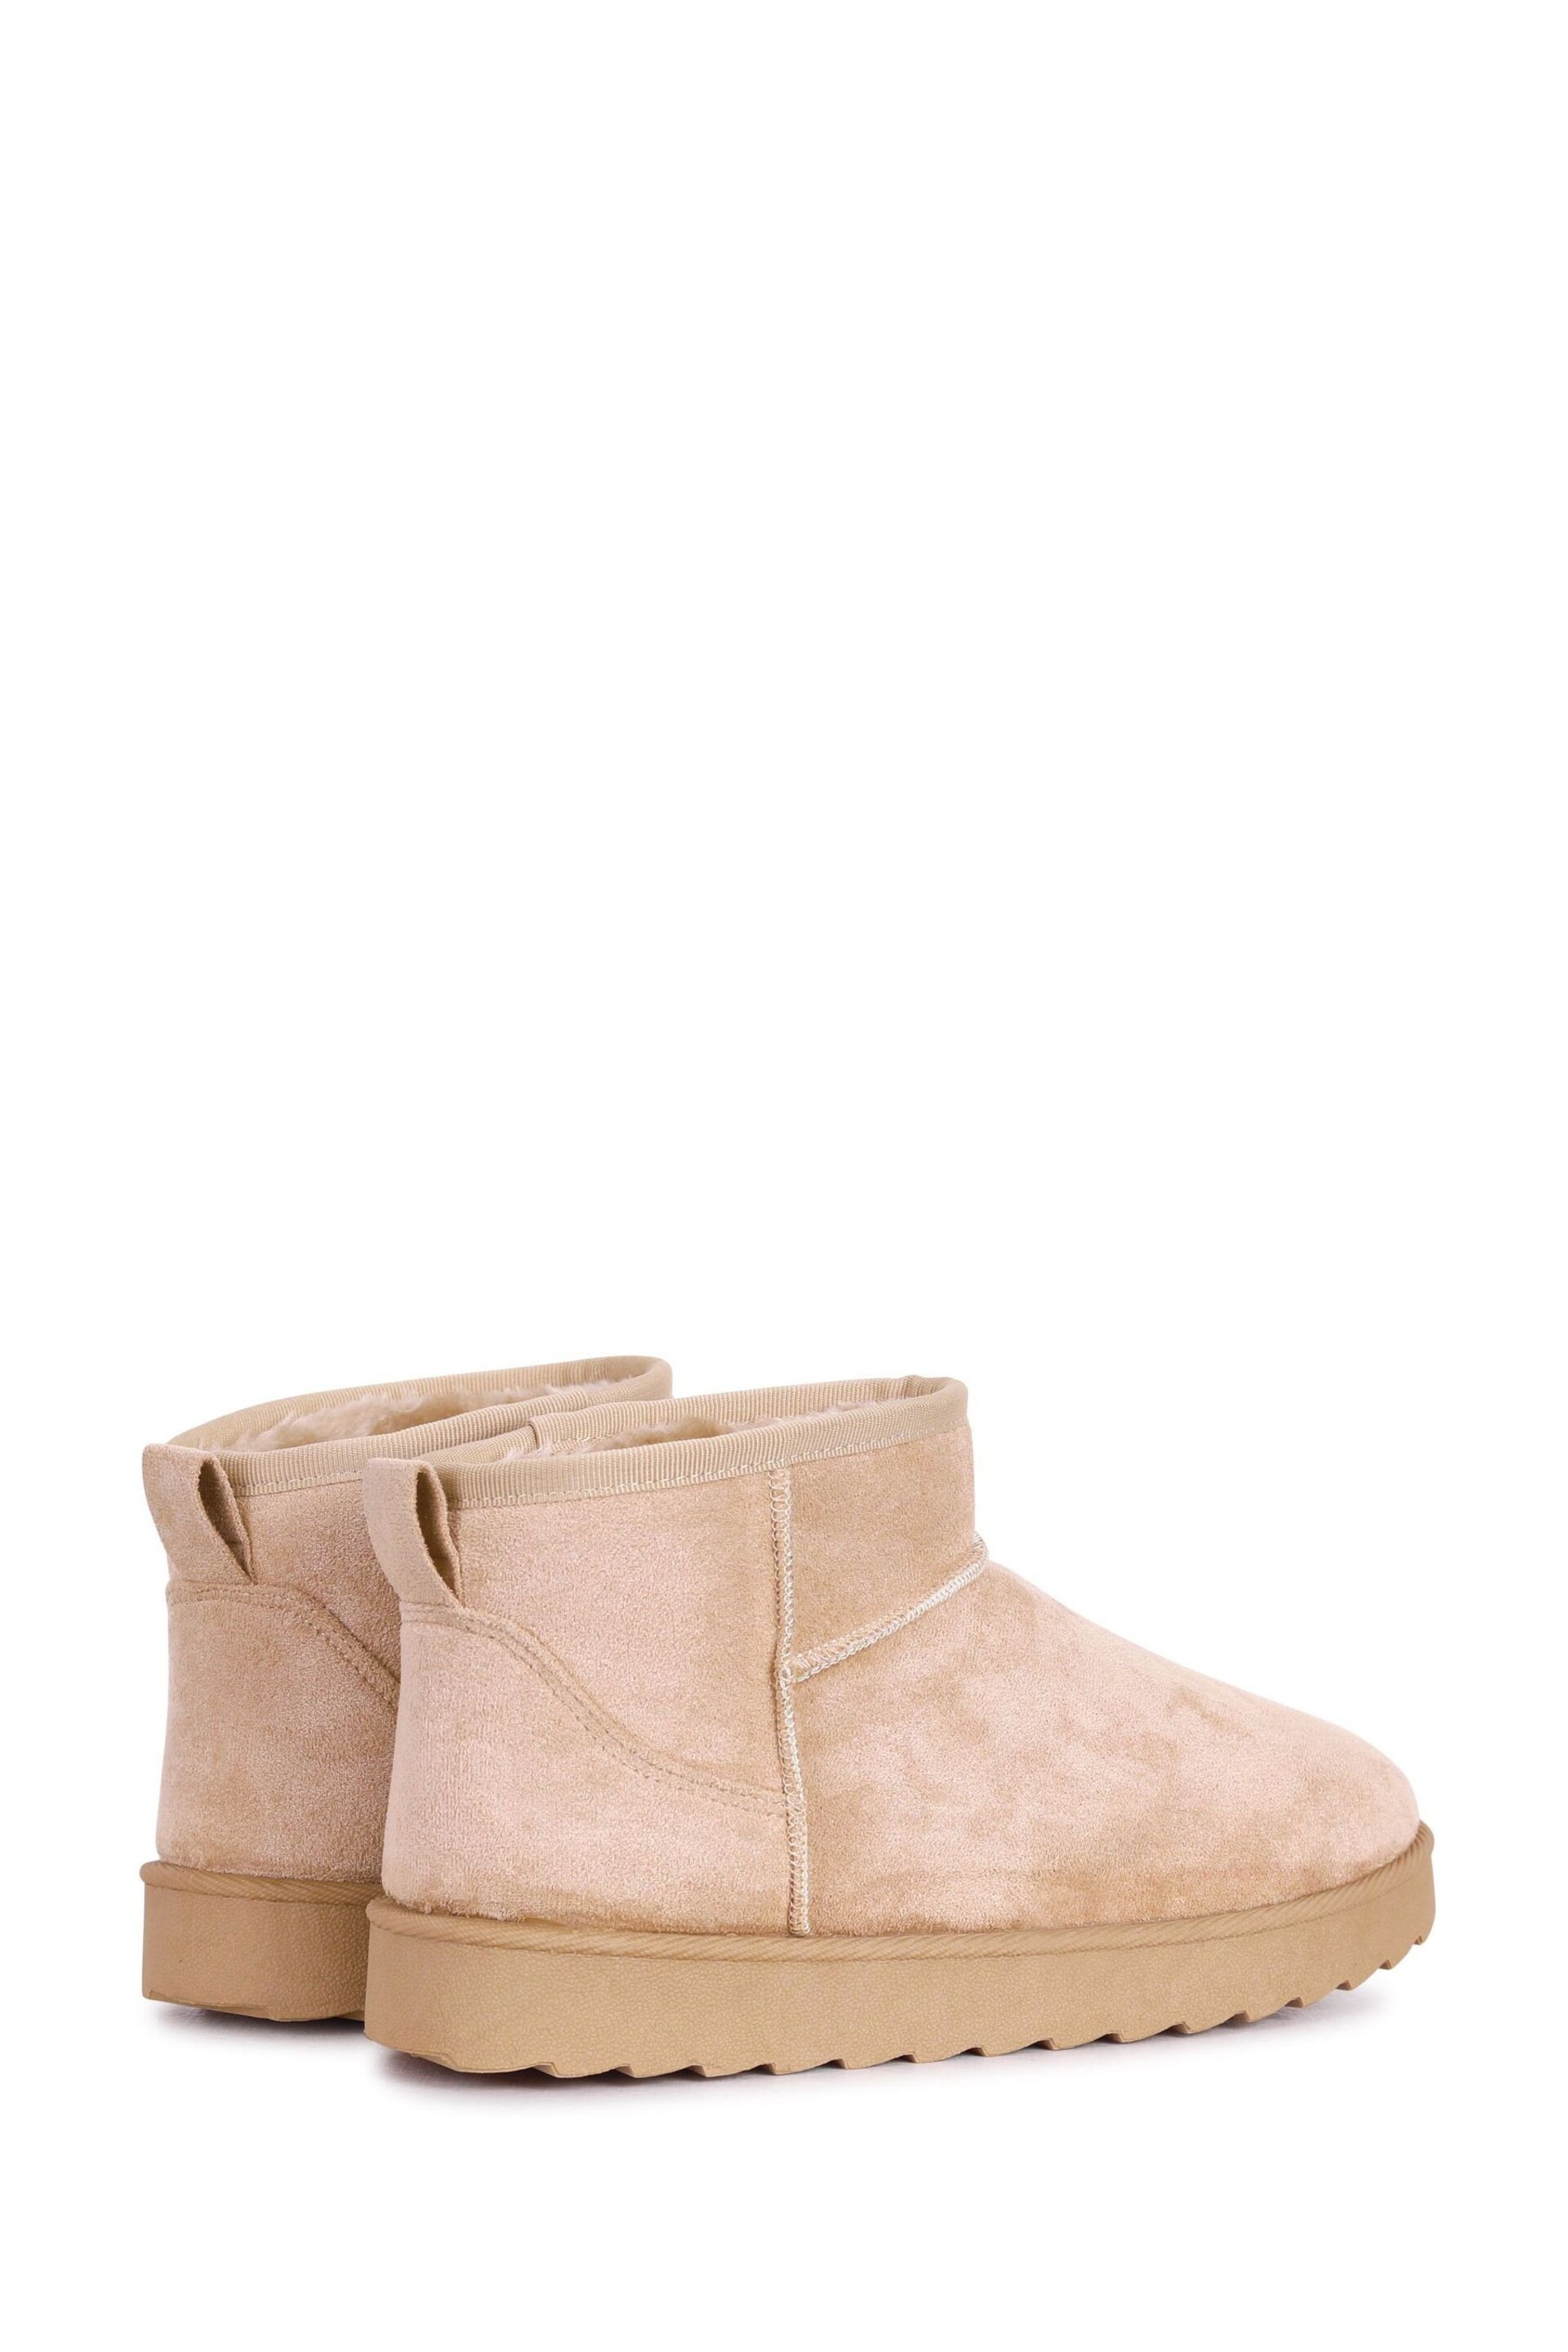 Linzi Nude Mini Addy Faux Suede Faux Fur Lined Ankle Boots - Image 4 of 4